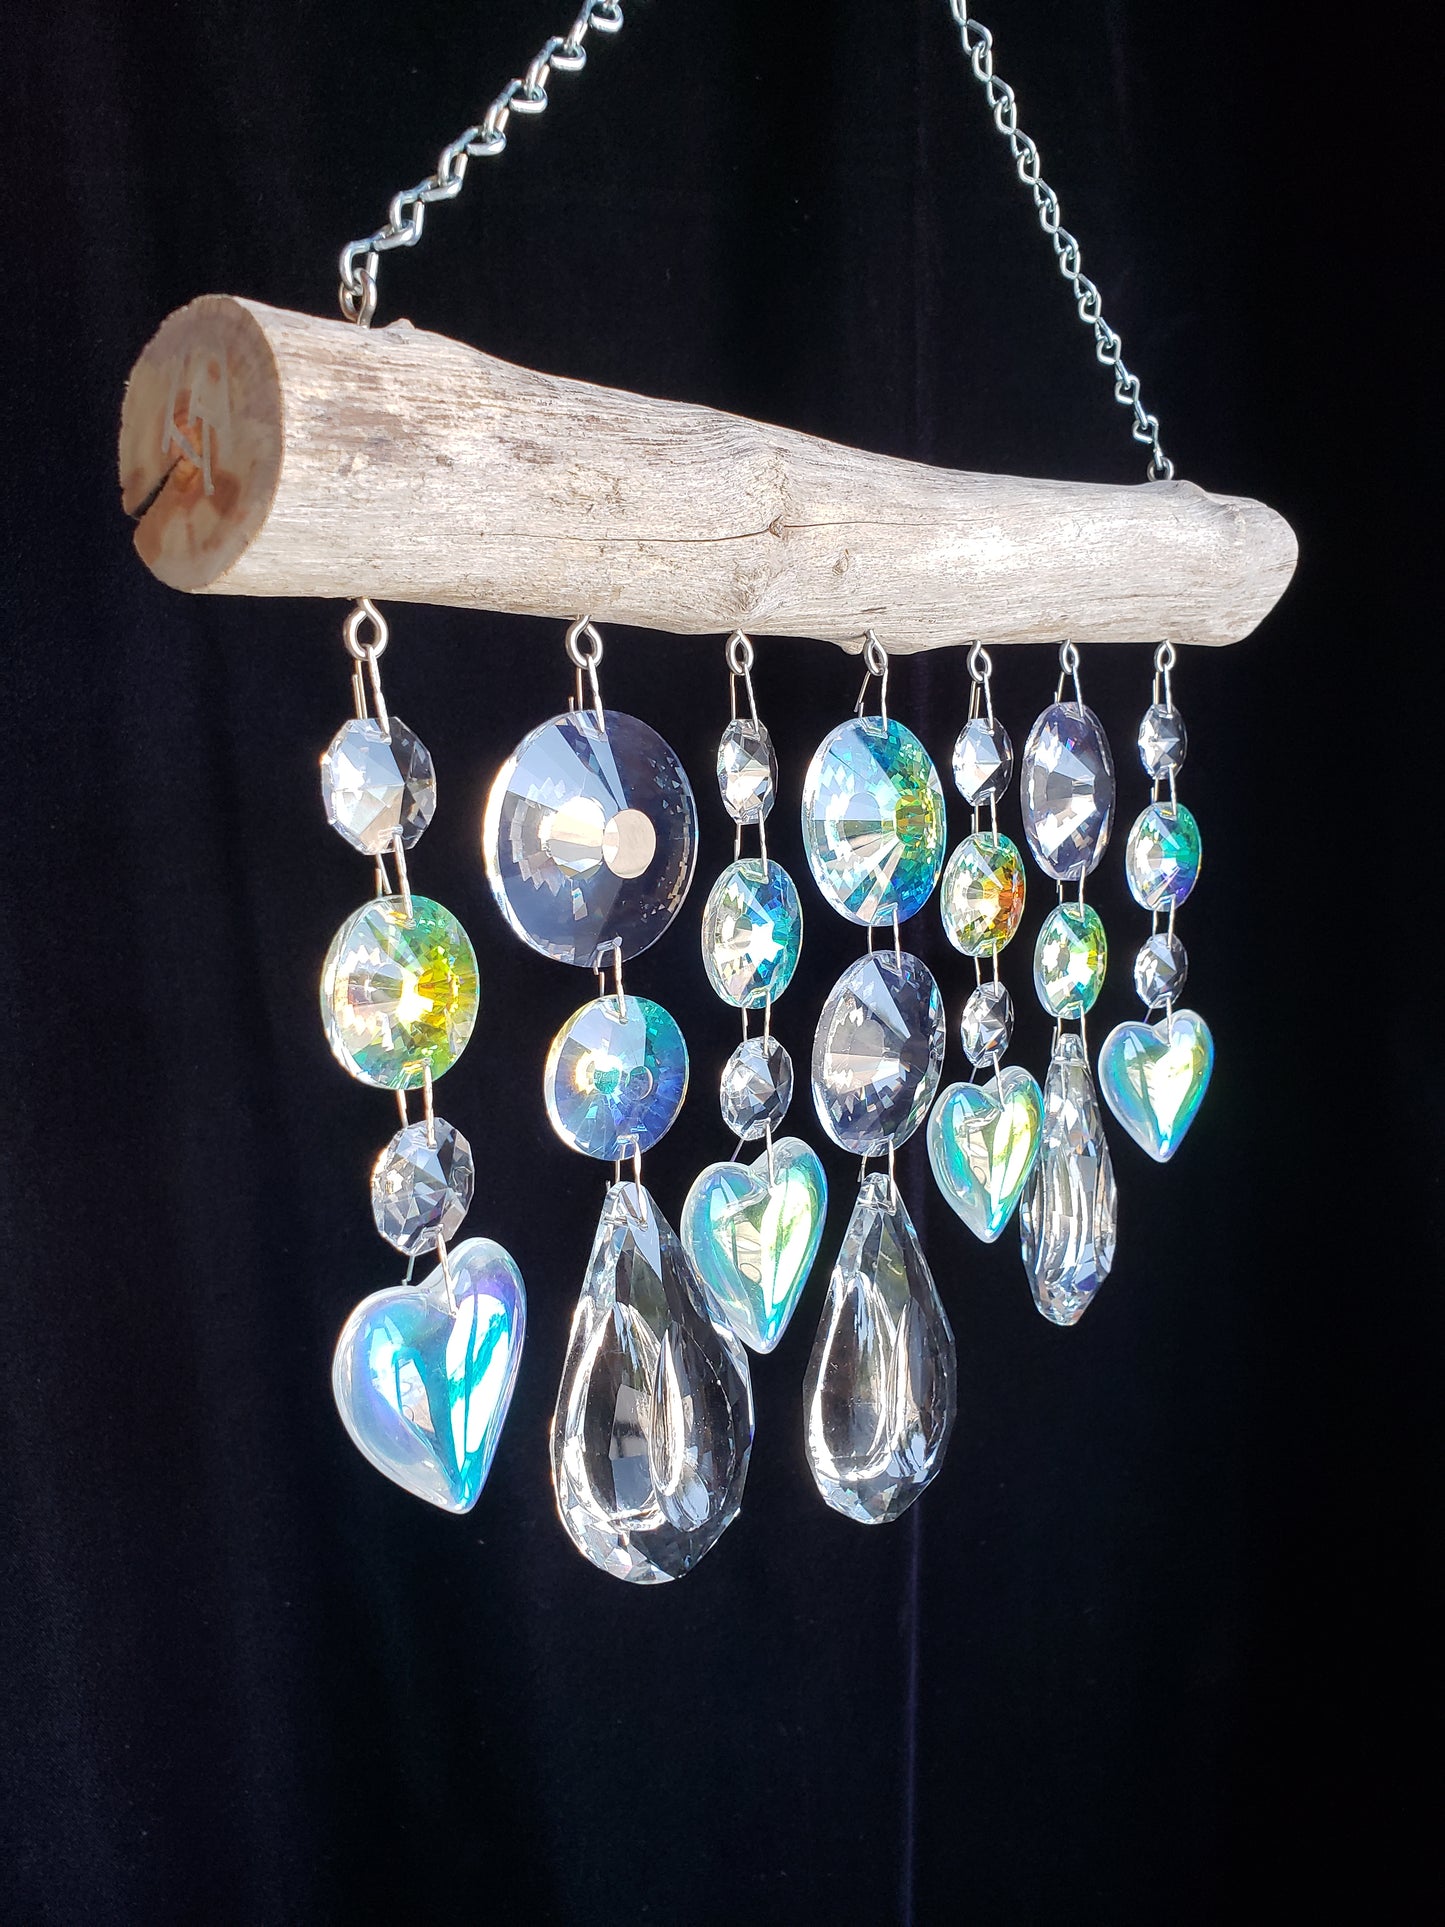 Chandelier crystal suncatcher with hearts by Dazzling Driftwood